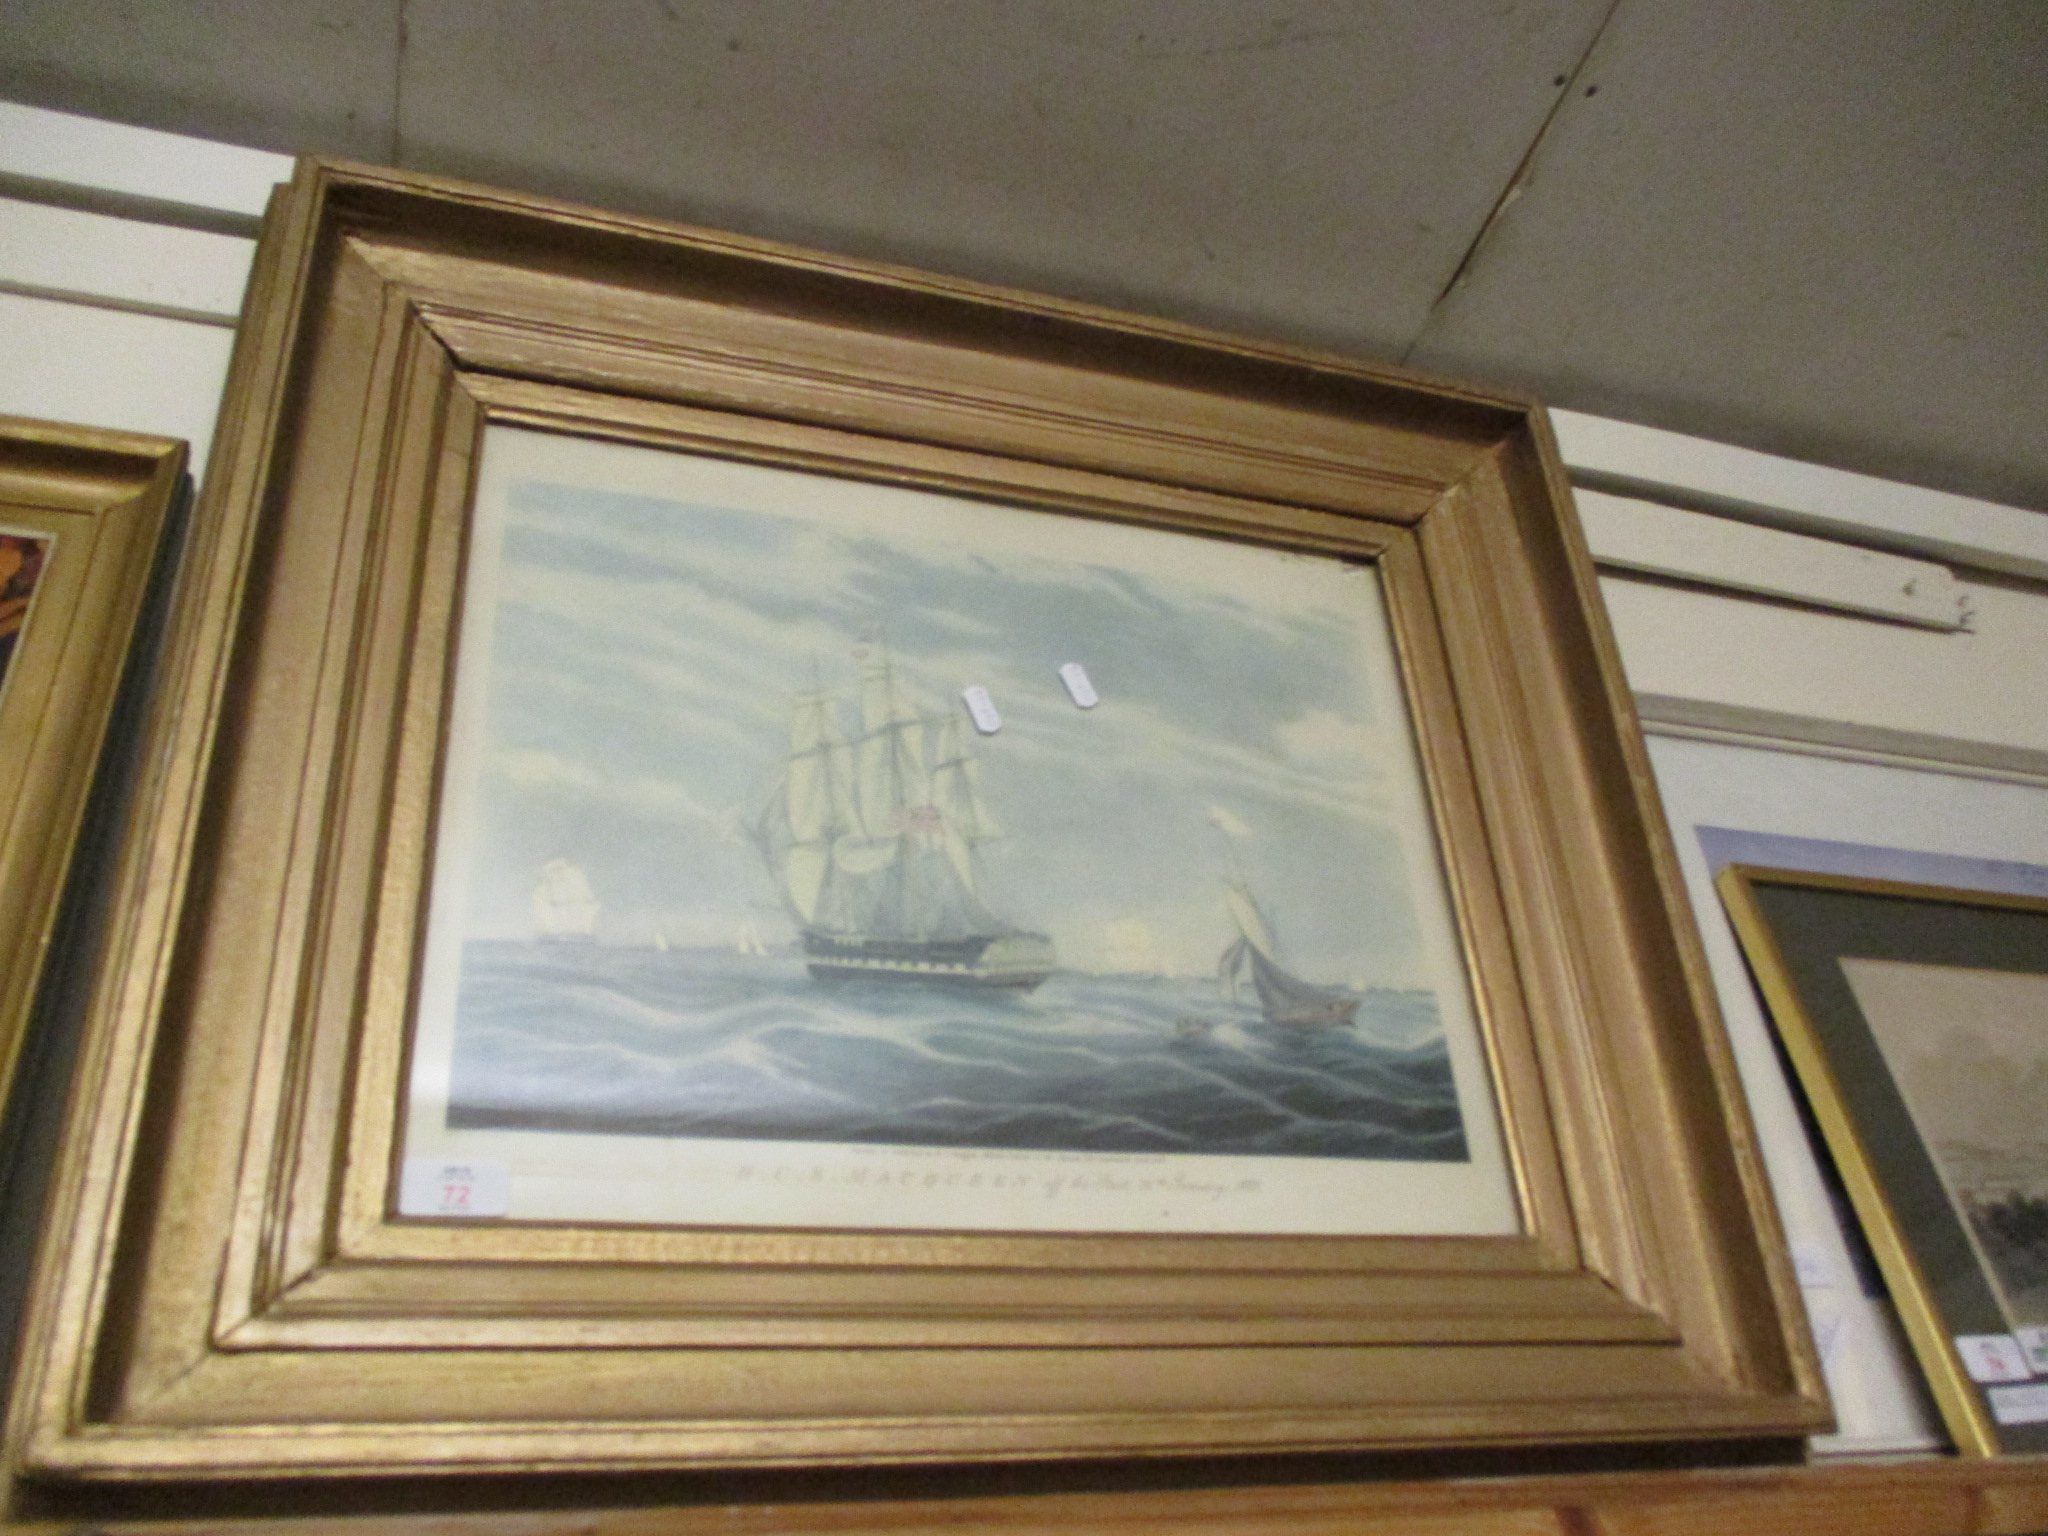 GILT FRAMED PRINT BY H C S MACQUEEN OF A SHIPPING SCENE